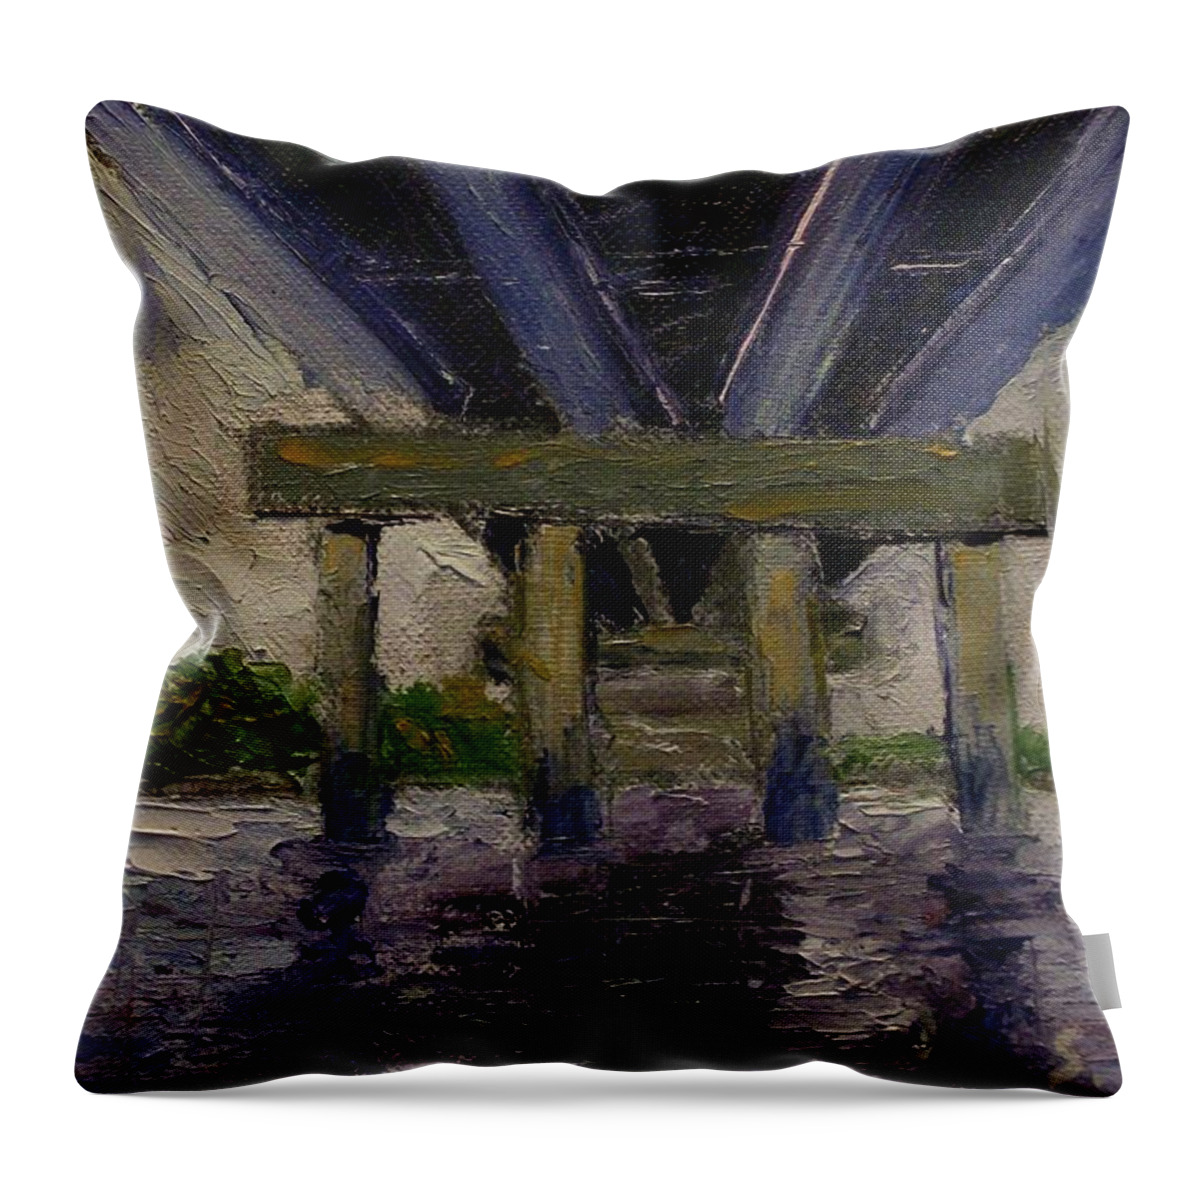 Oil Throw Pillow featuring the painting Under the Bridge by Stephen King